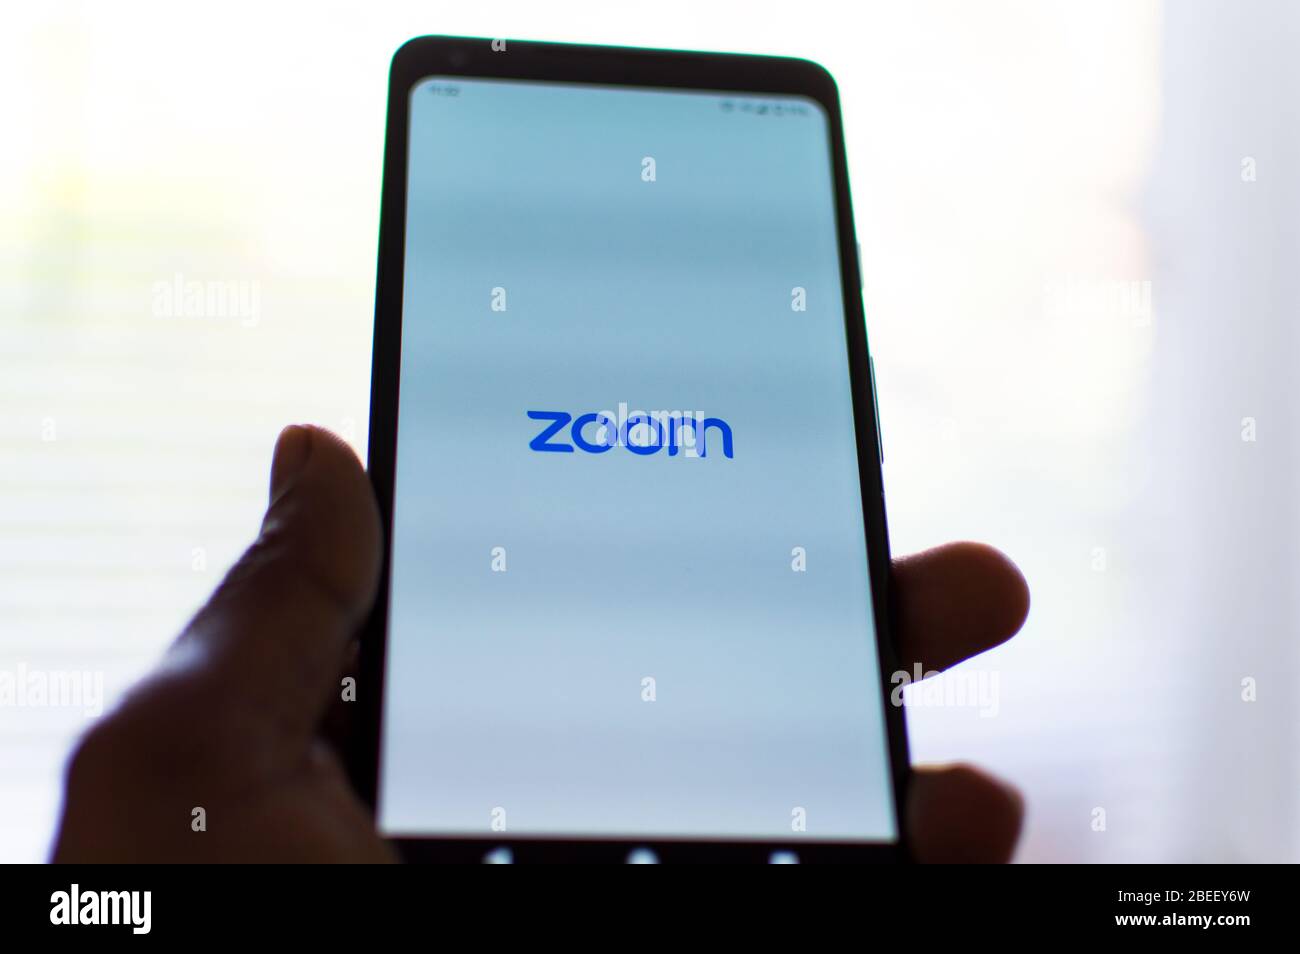 ZOOM video conference app on phone Stock Photo